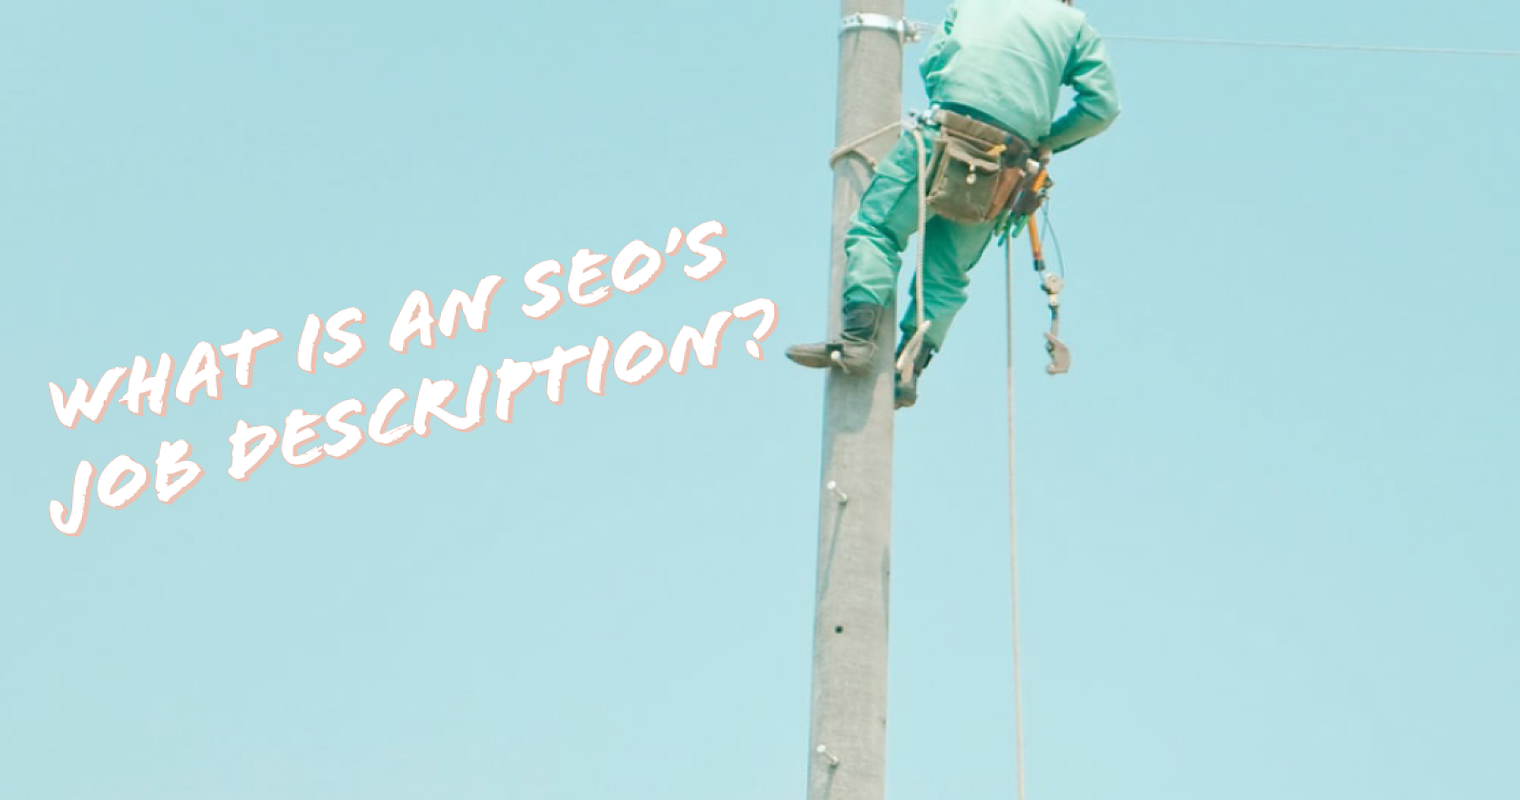 What Does It Mean to ‘Do SEO’?